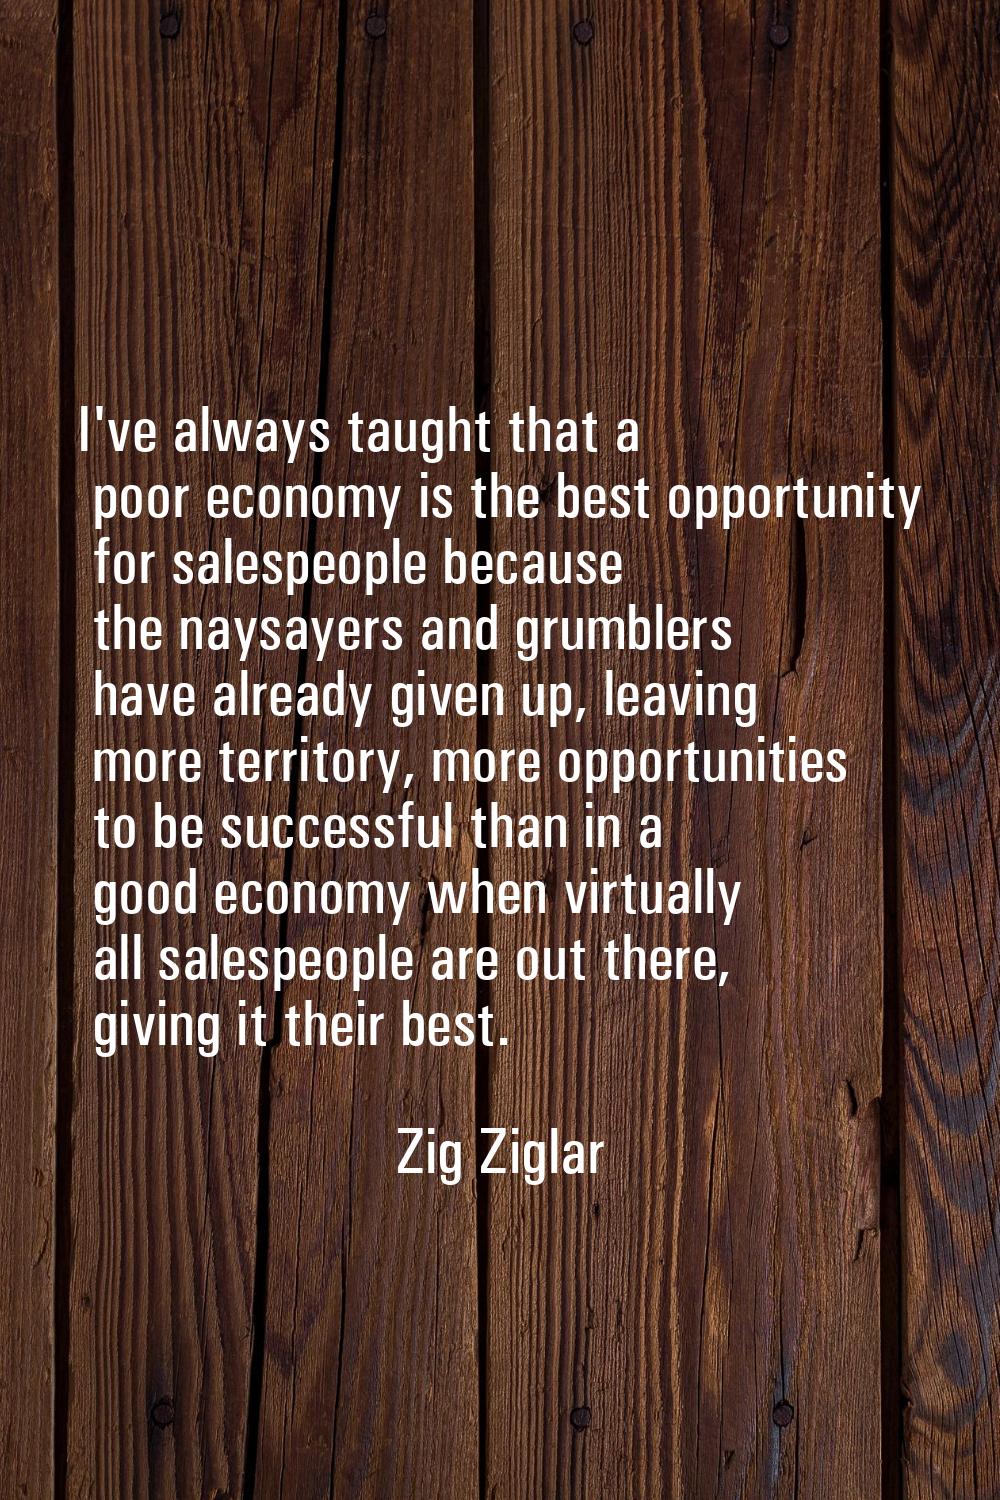 I've always taught that a poor economy is the best opportunity for salespeople because the naysayer